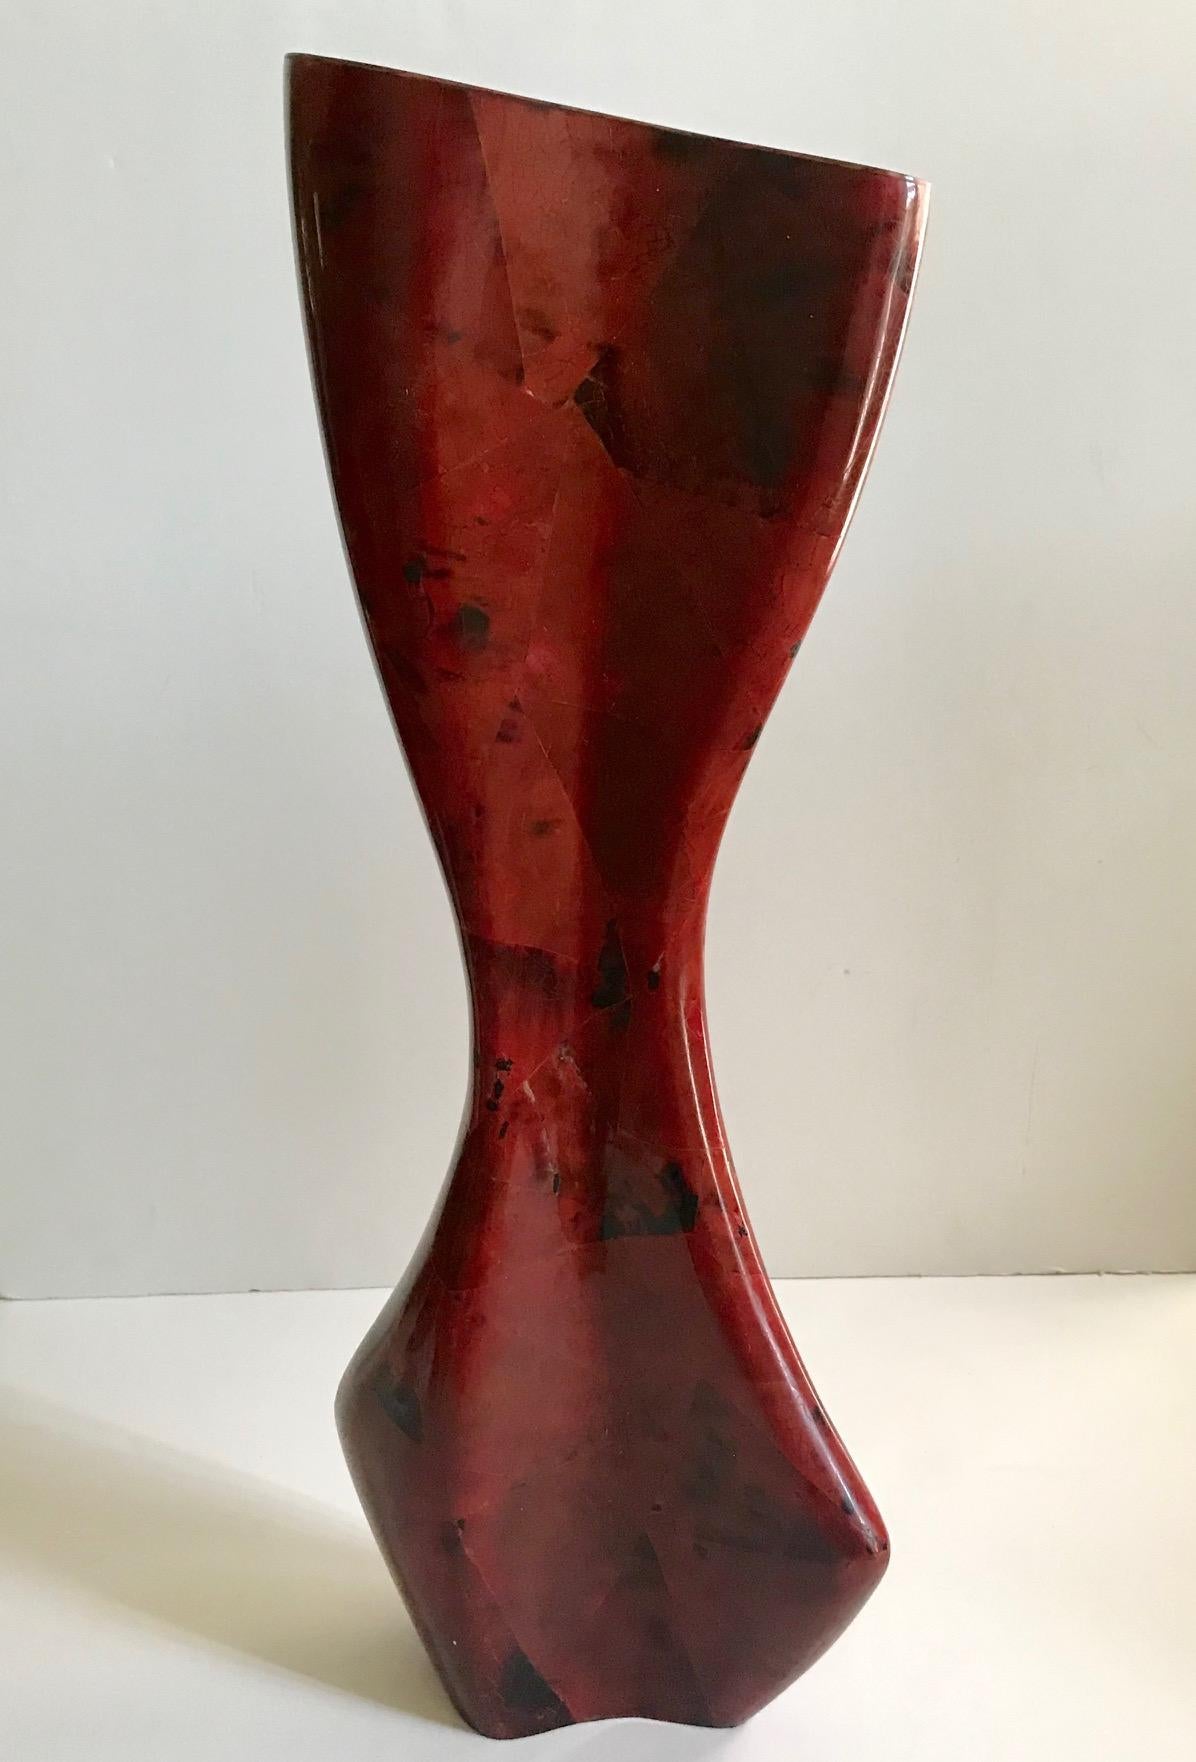 Organic modern vase with sculptural abstract form. Handcrafted from exotic materials featuring lacquered pen-shell inlays with geometric patterns in red and black. Comprised of pen-shell over palm wood and stamped with R & Y signature.